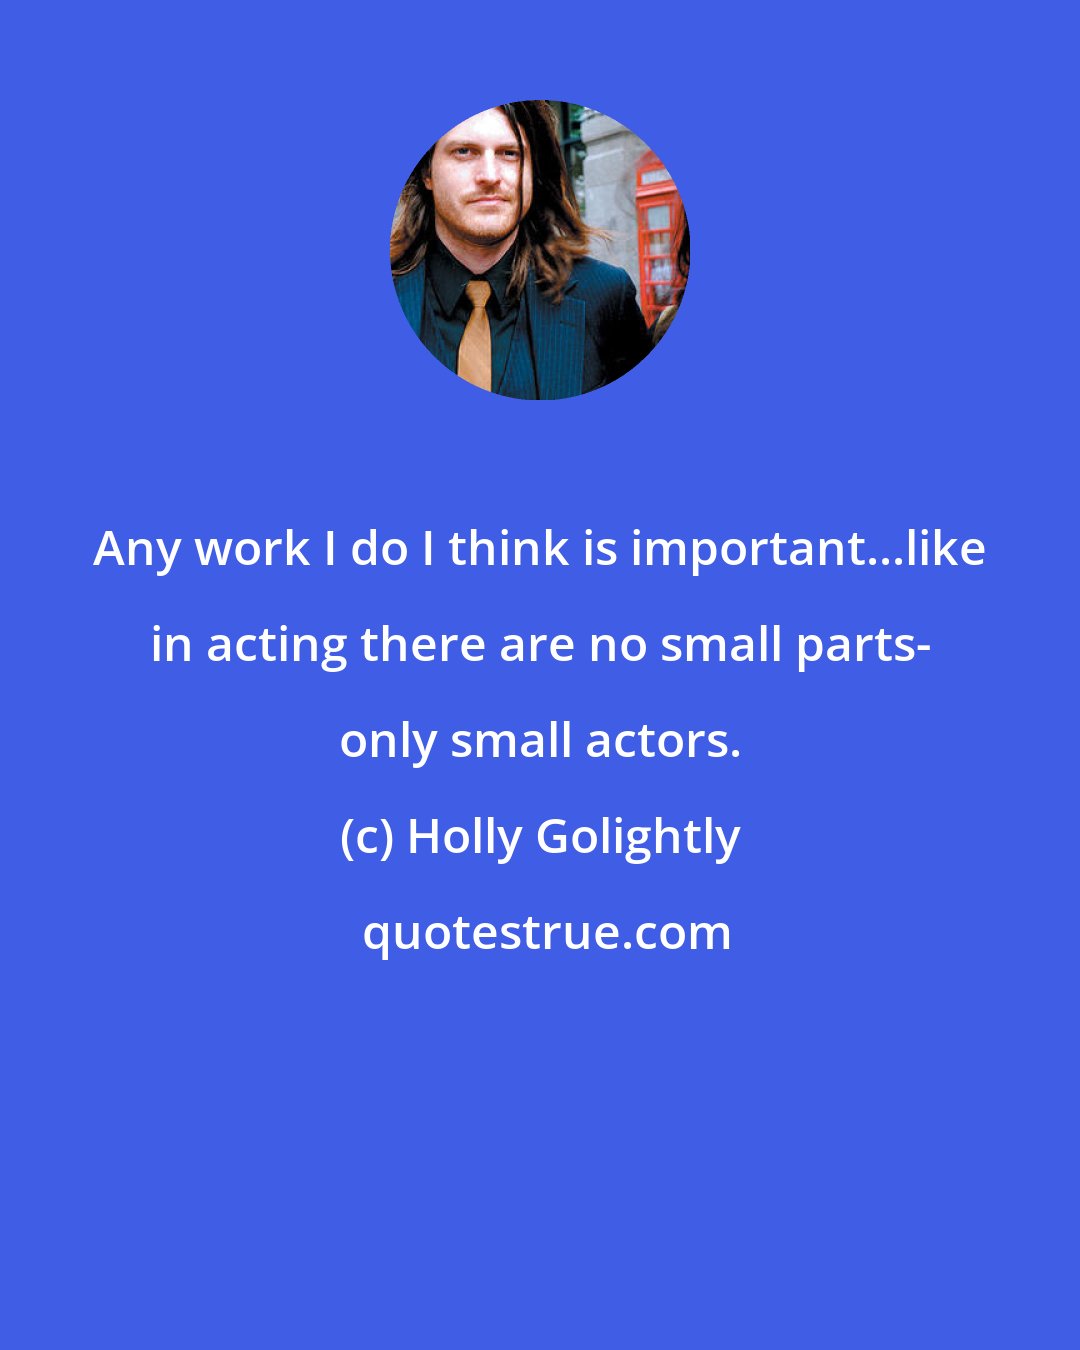 Holly Golightly: Any work I do I think is important...like in acting there are no small parts- only small actors.